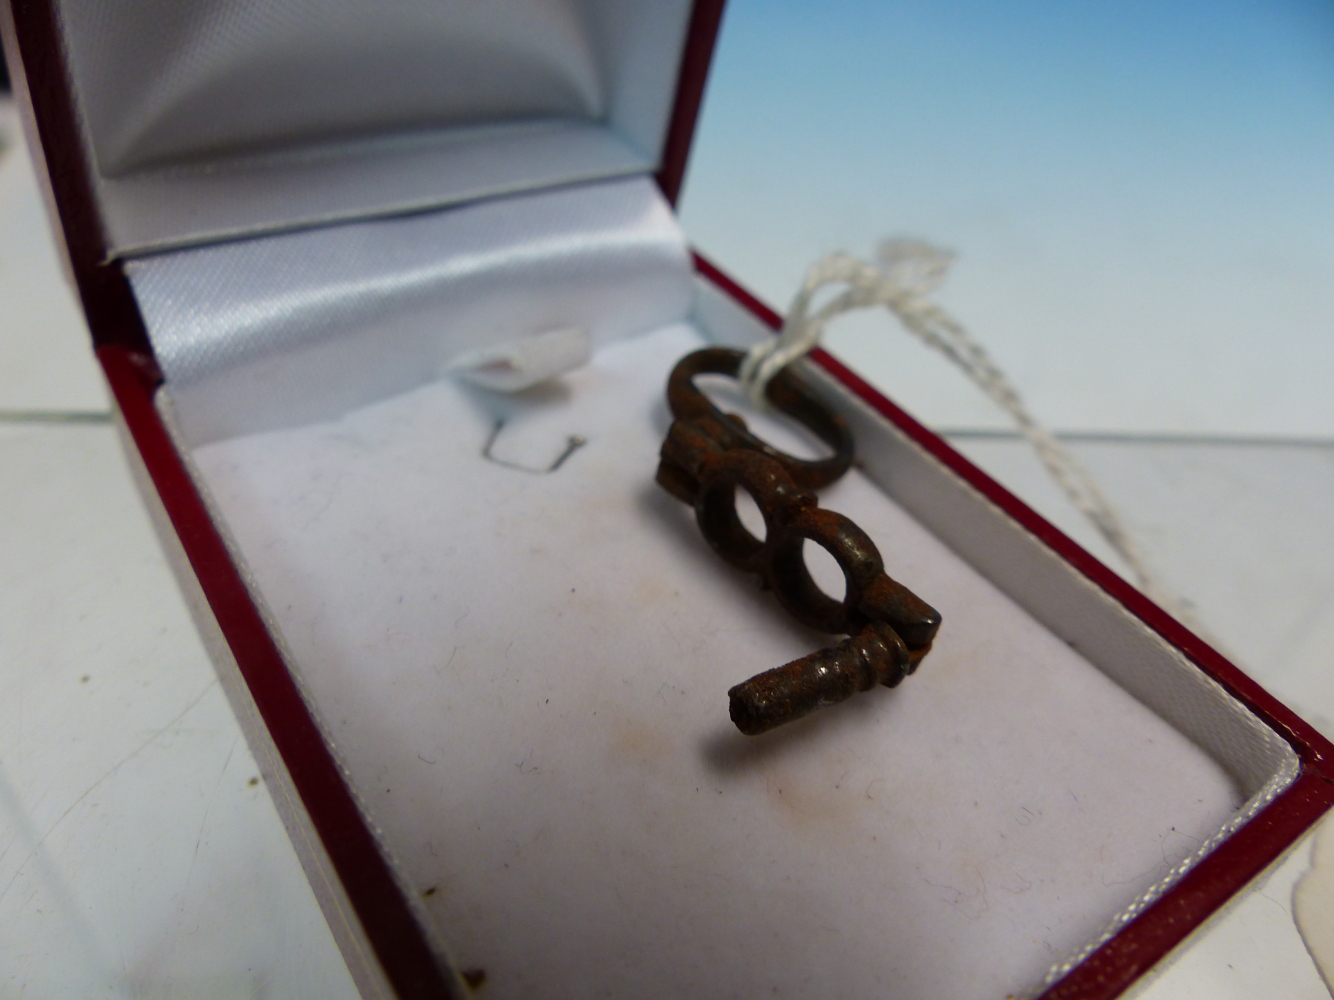 AN ARTICULATED WATCH KEY JOINTED TO WORK IN LINE OR AT RIGHT ANGLES TO THE LOOP HANDLE. - Image 4 of 4